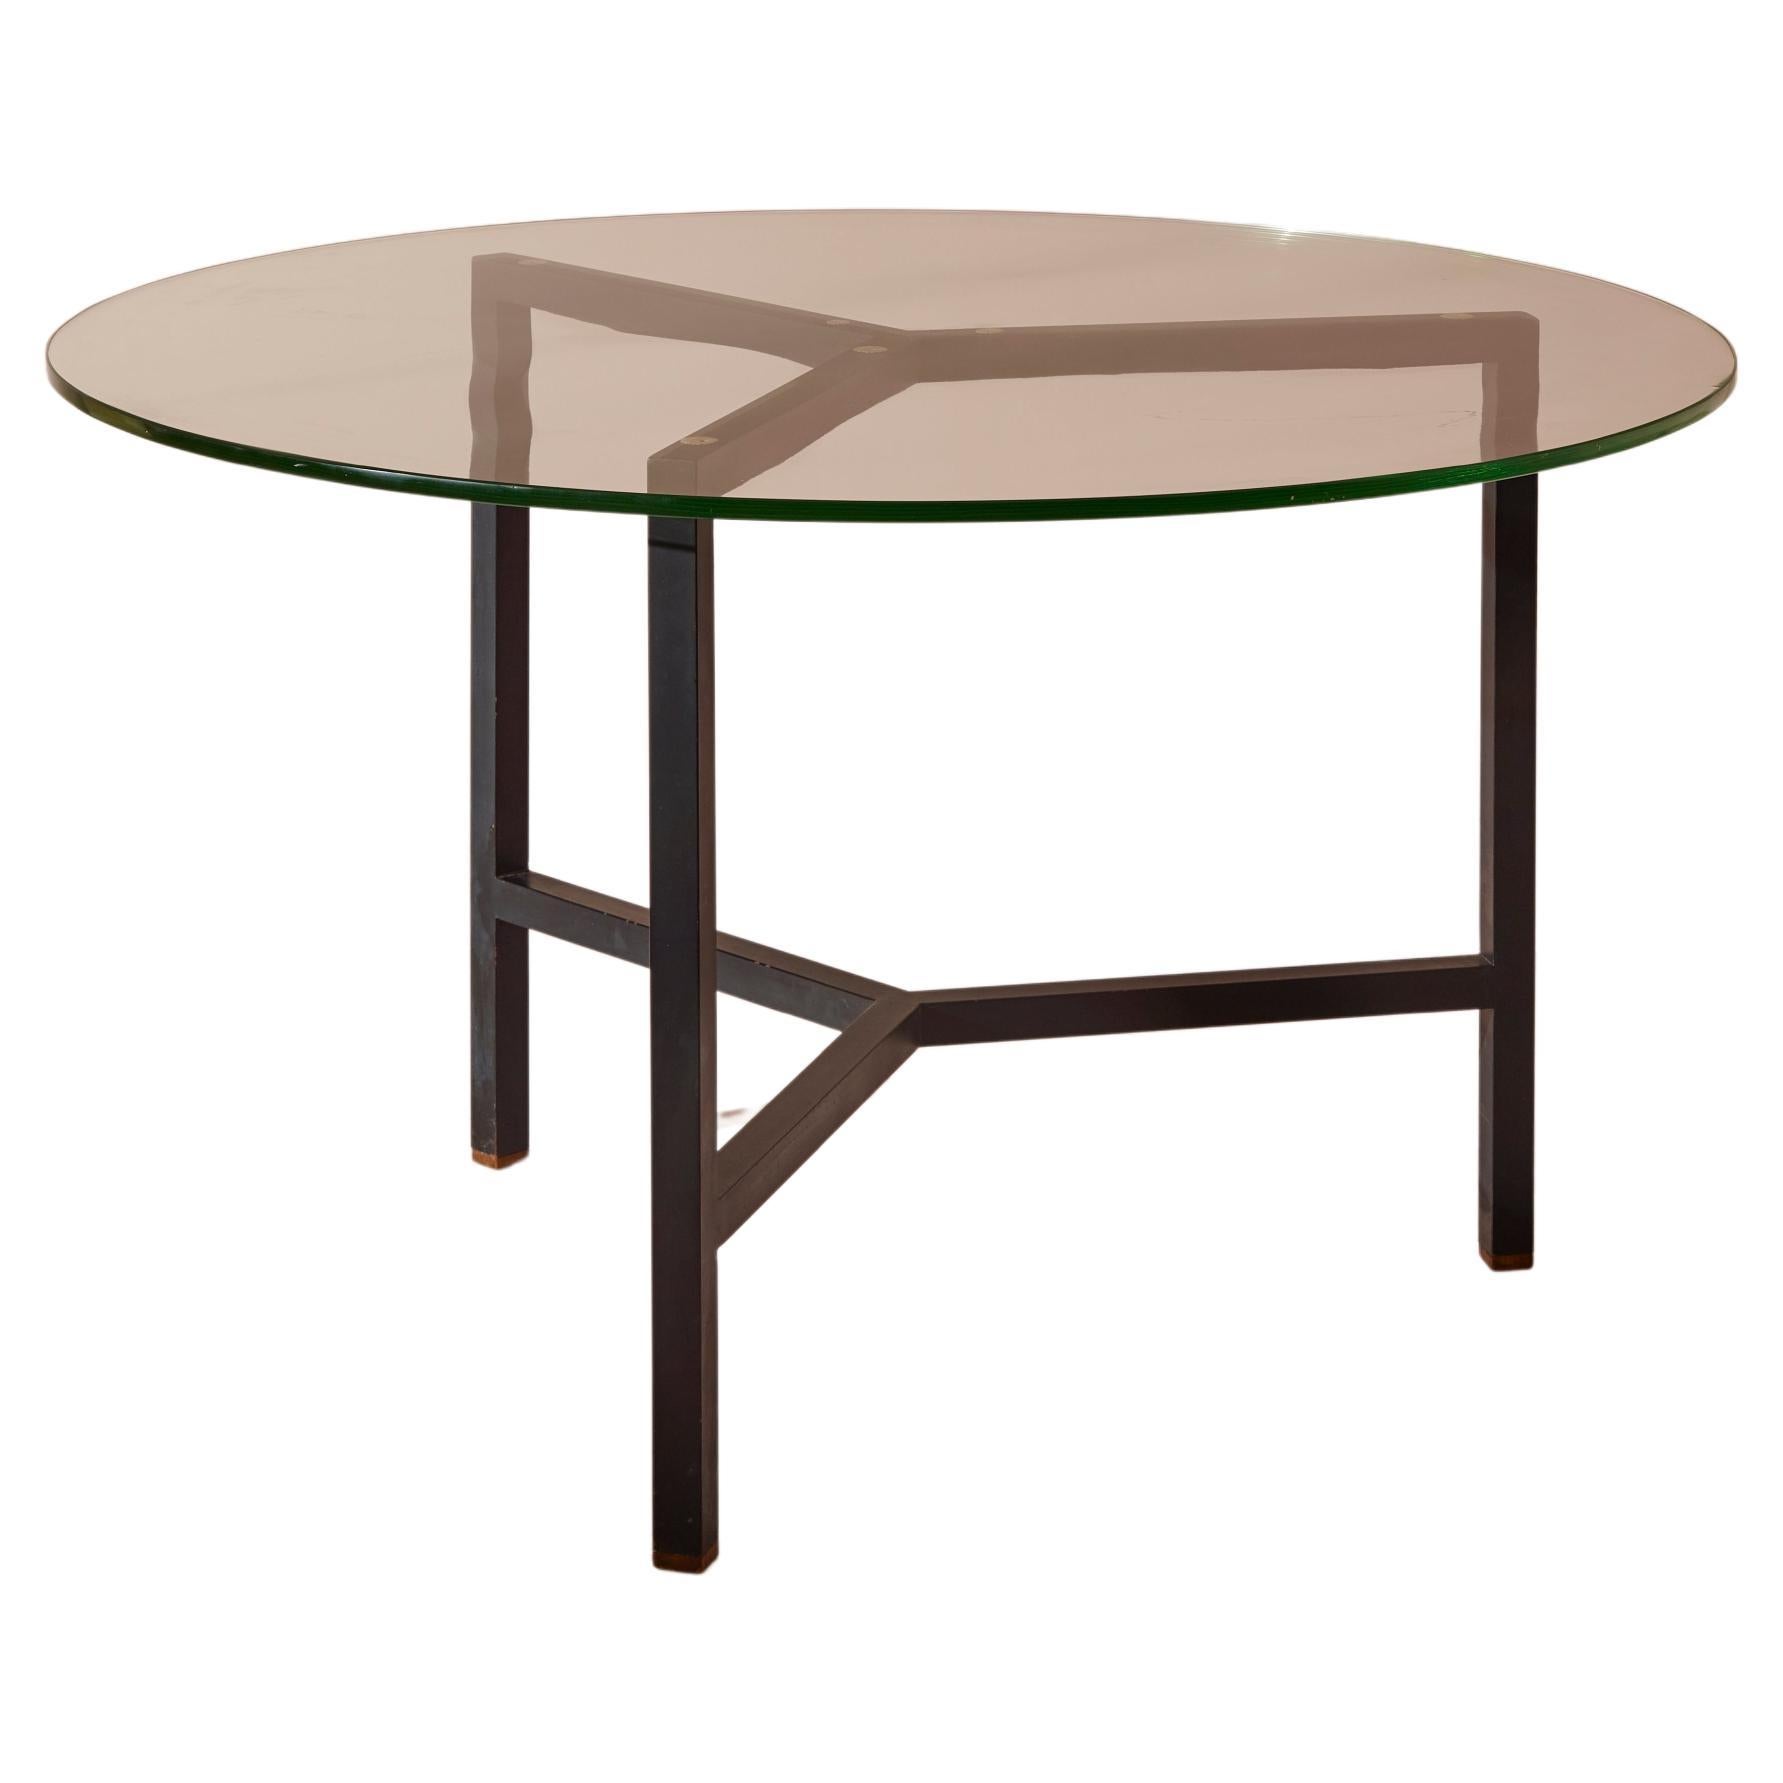 A metal and glass round dining table, Italy, 1950s